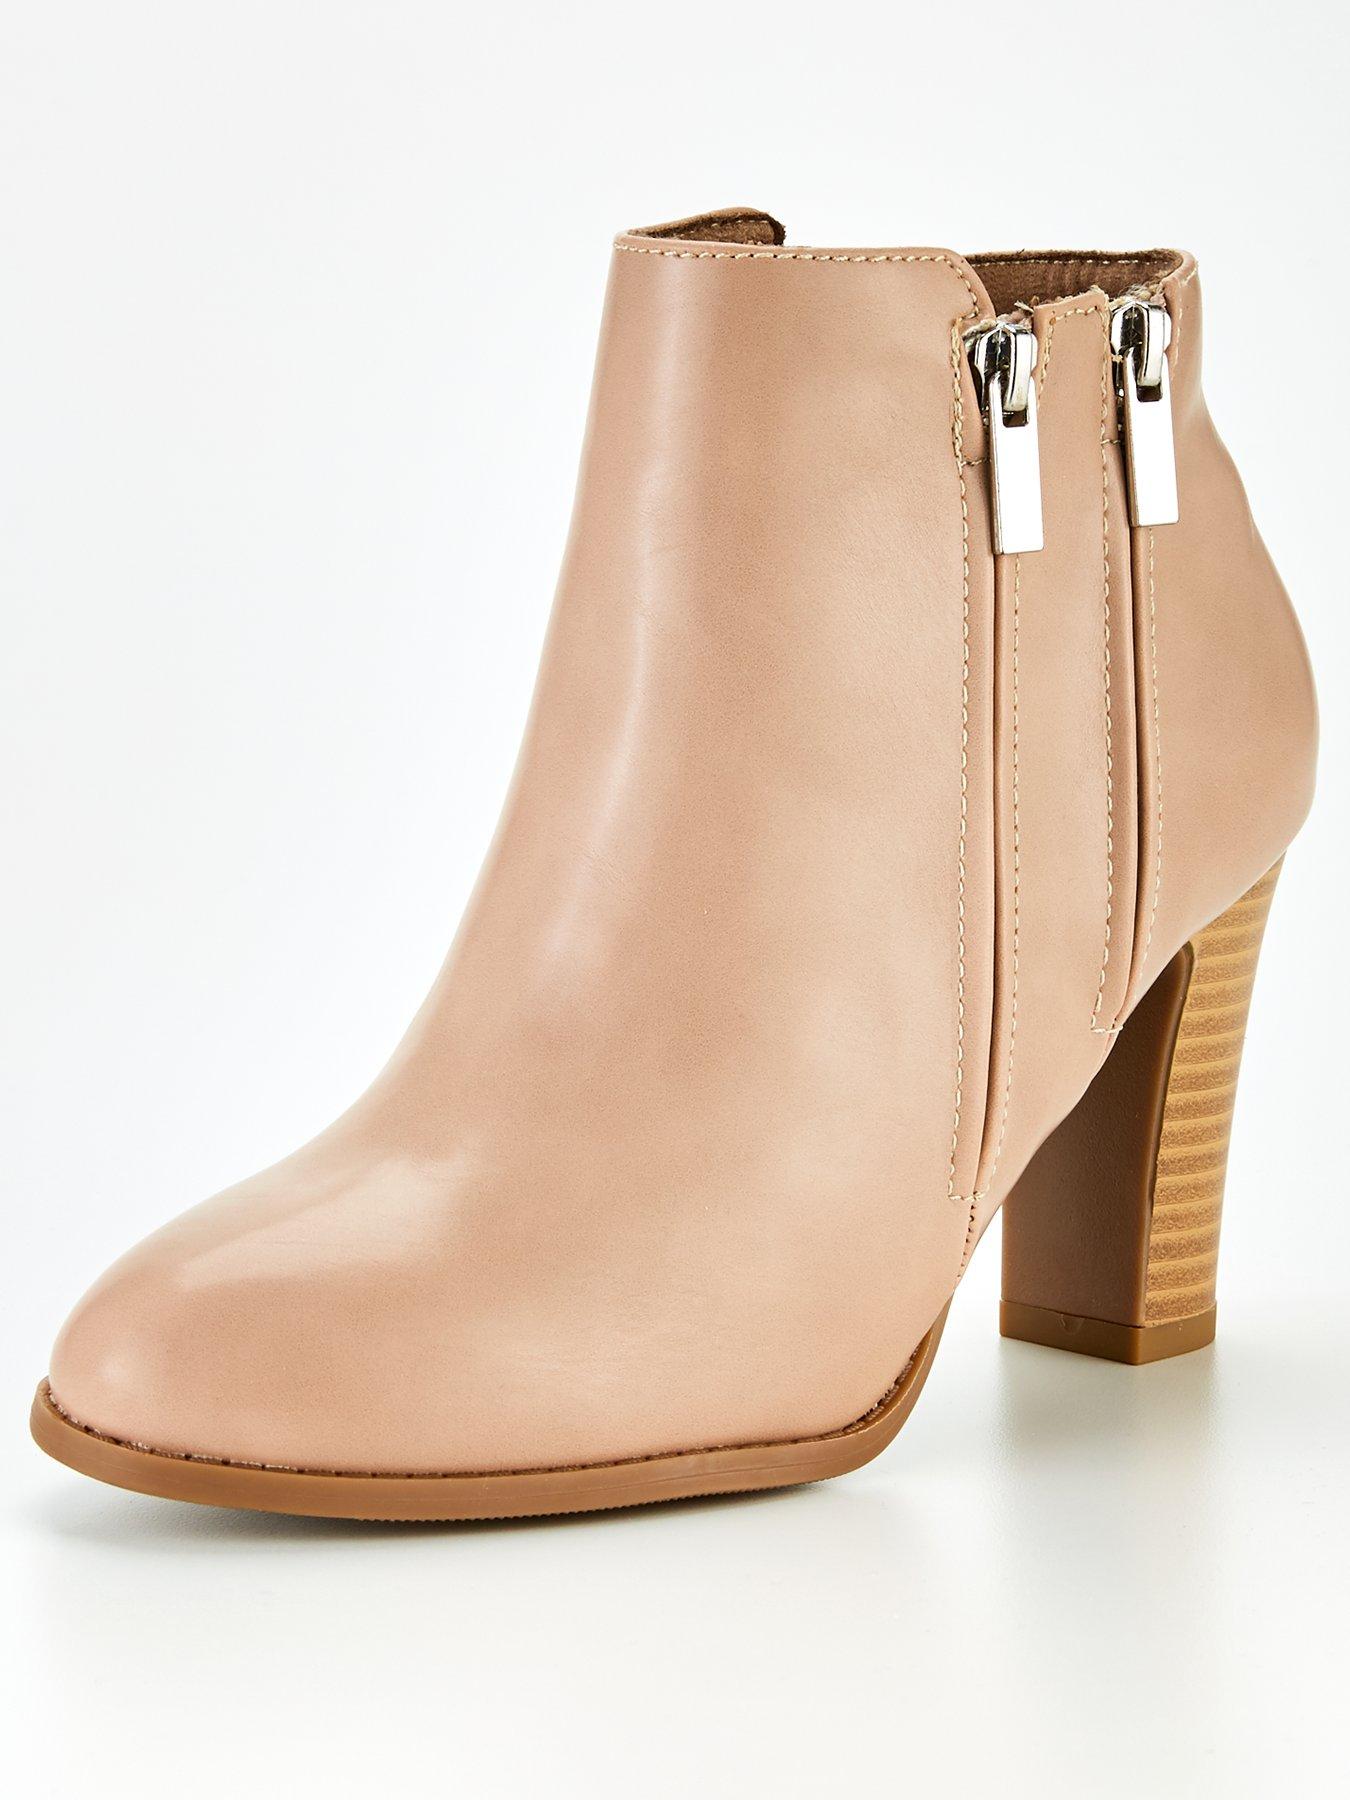 Ankle Boots | Wallis | Boots | Shoes 